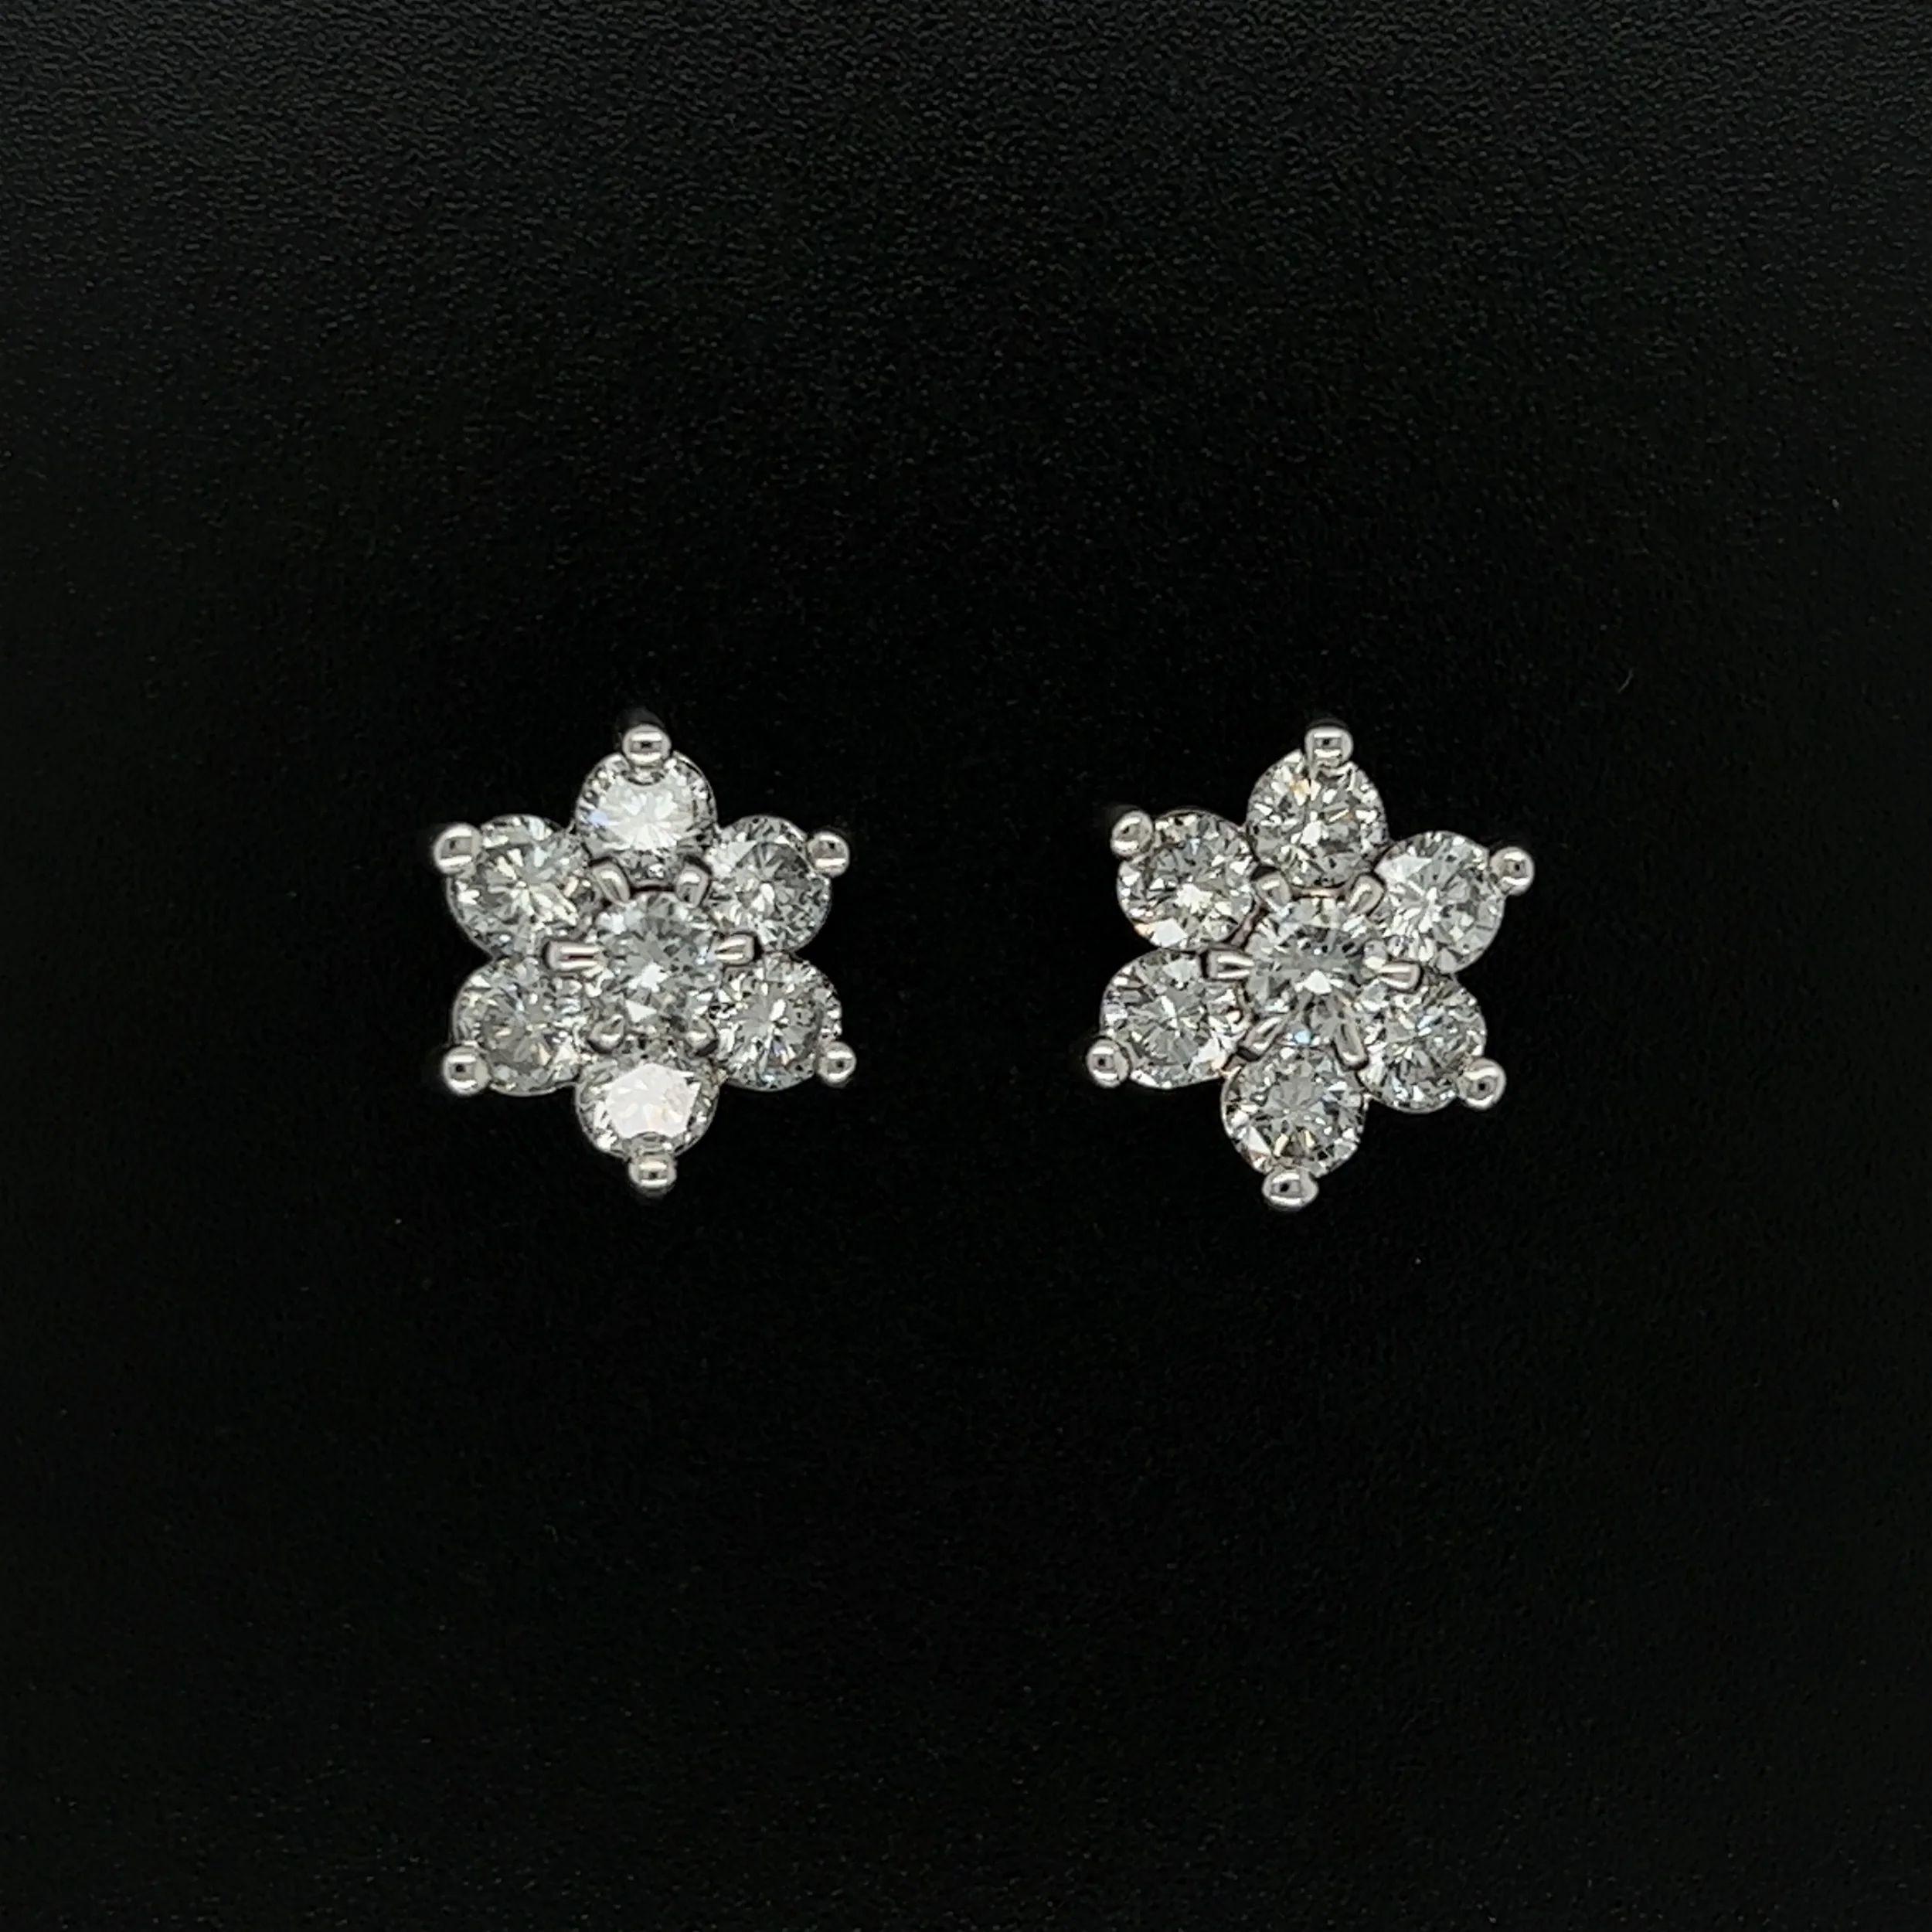 Simply Beautiful! Pair of round Diamond Cluster Gold 12.2mm Stud Earrings. Securely nestled Hand set Diamonds, weighing approx. 2.08tcw, in Platinum four-claw setting. Measuring approx. 0.72” L x 0.43” W x 0.47” H. These earrings are in excellent